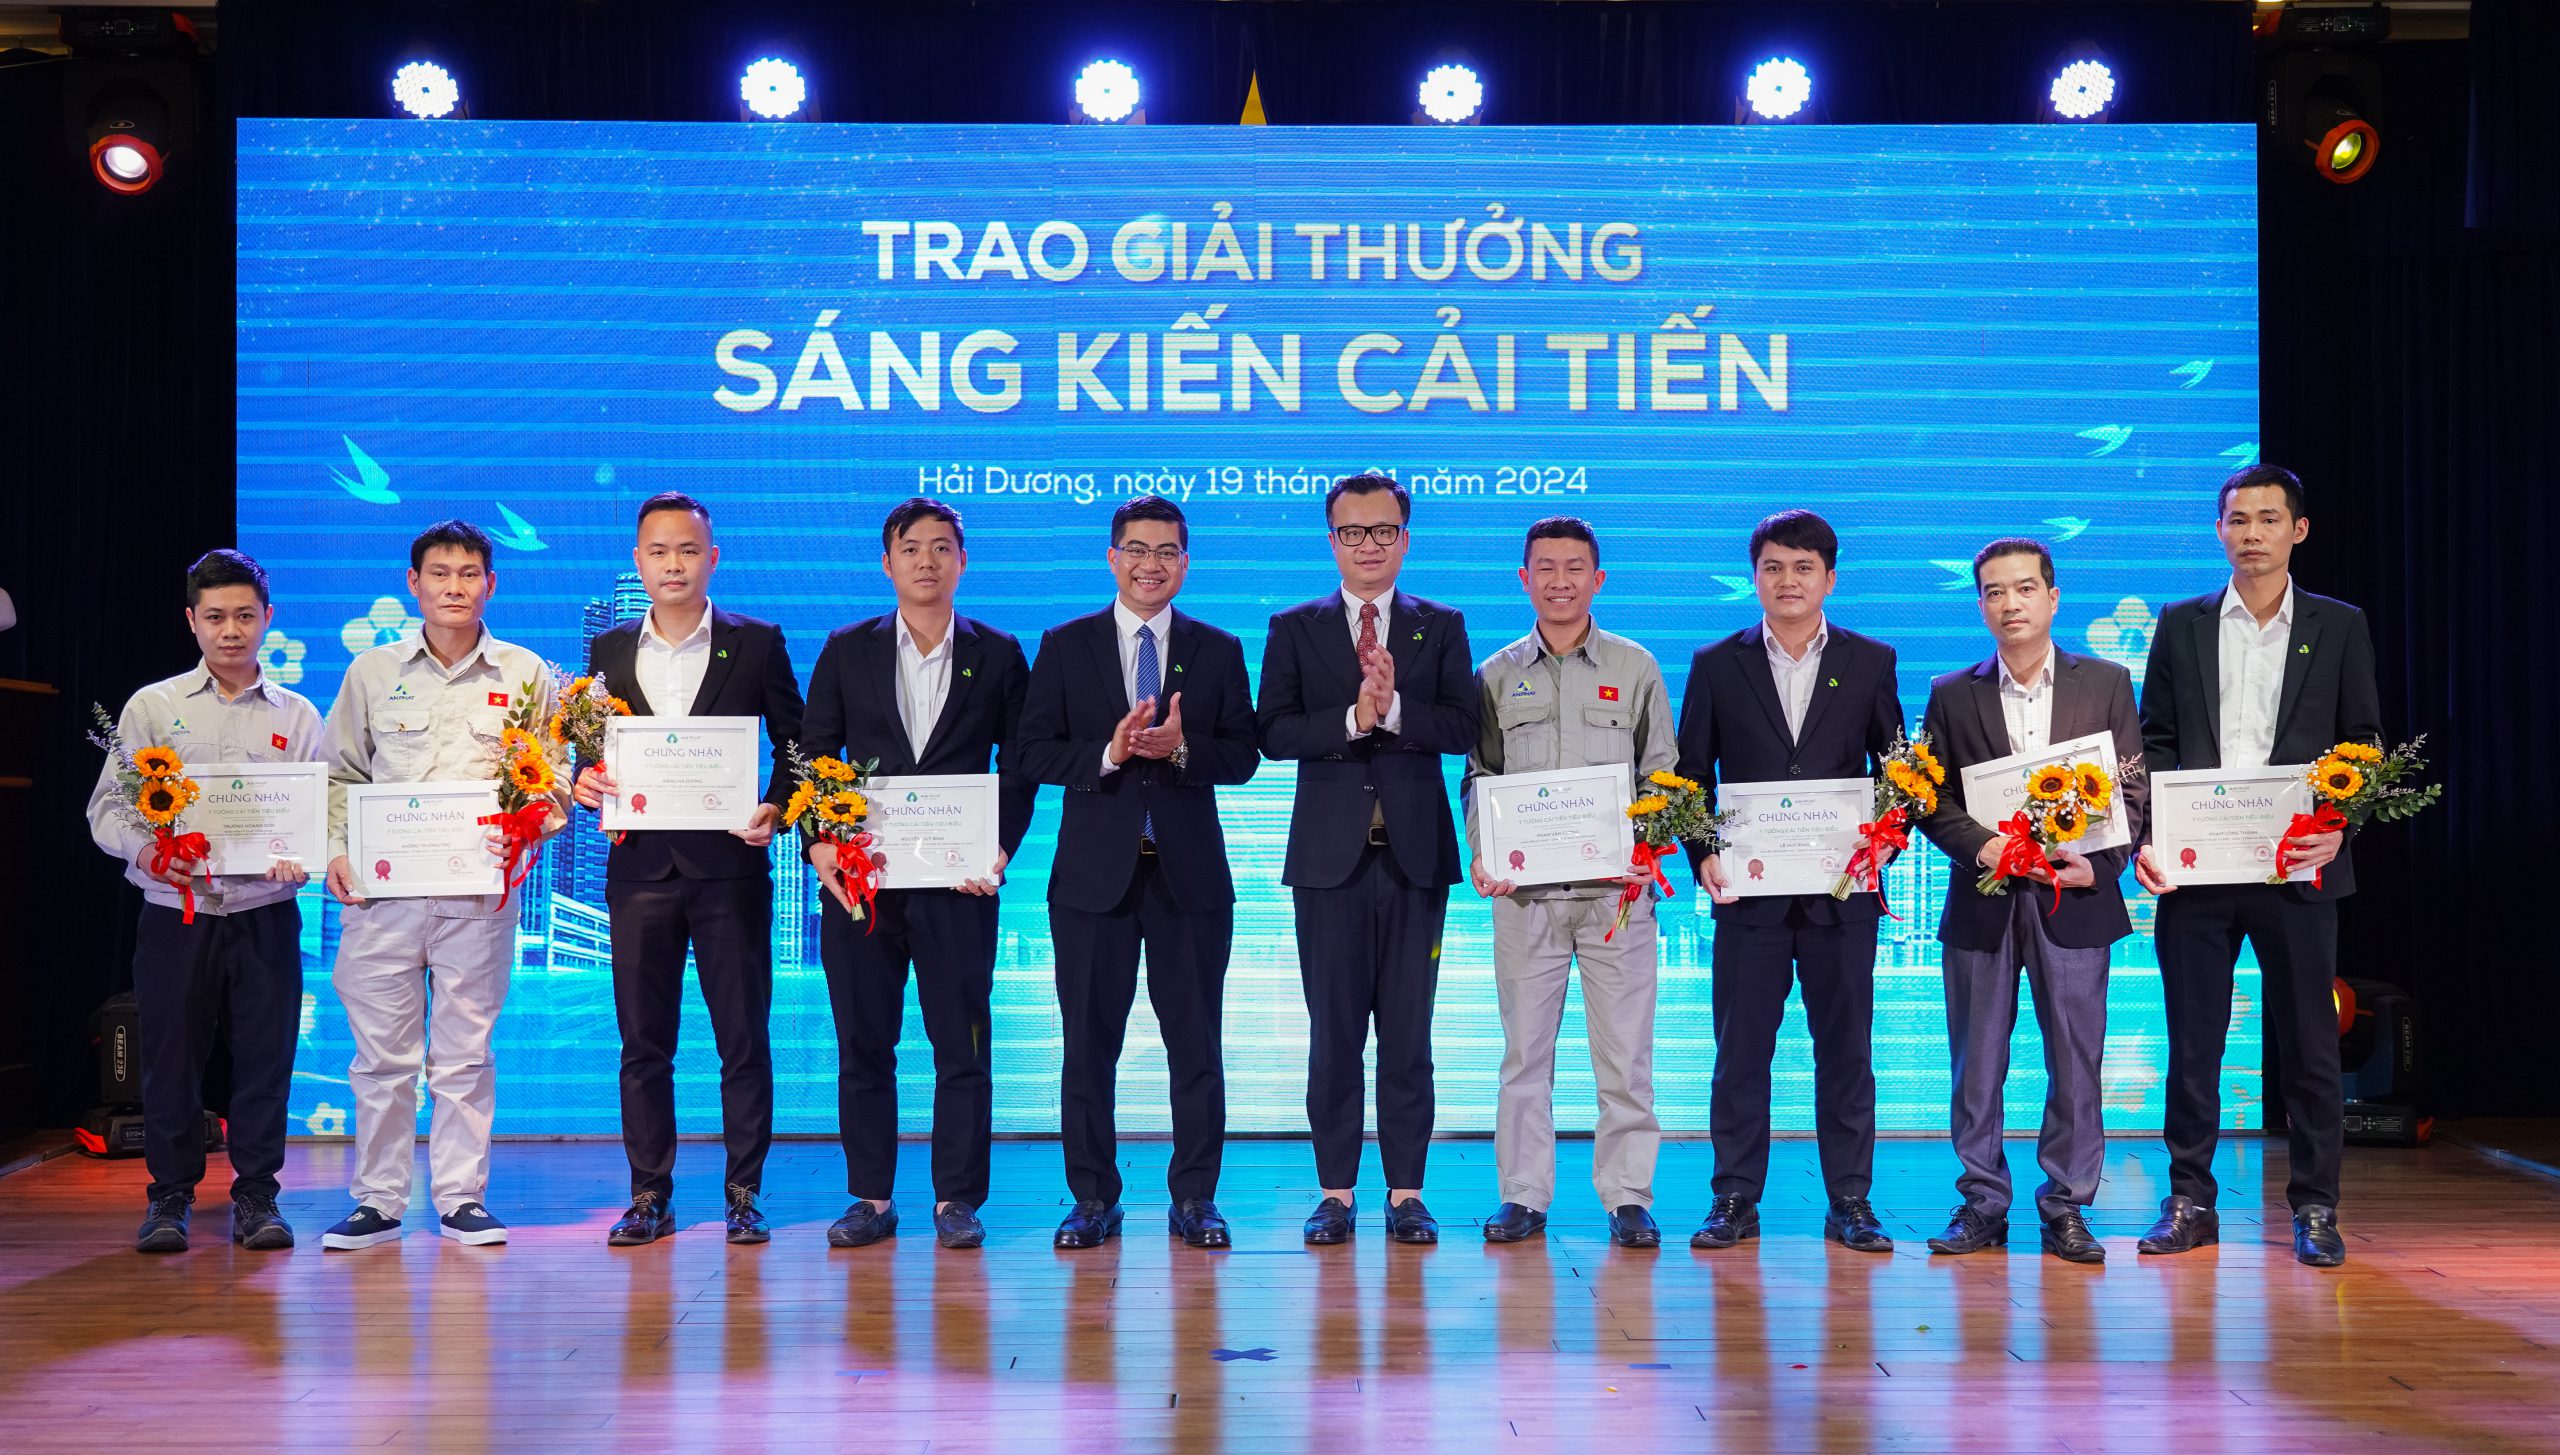 The Group's Board of Directors awards individuals who contribute innovative ideas to production and business activities